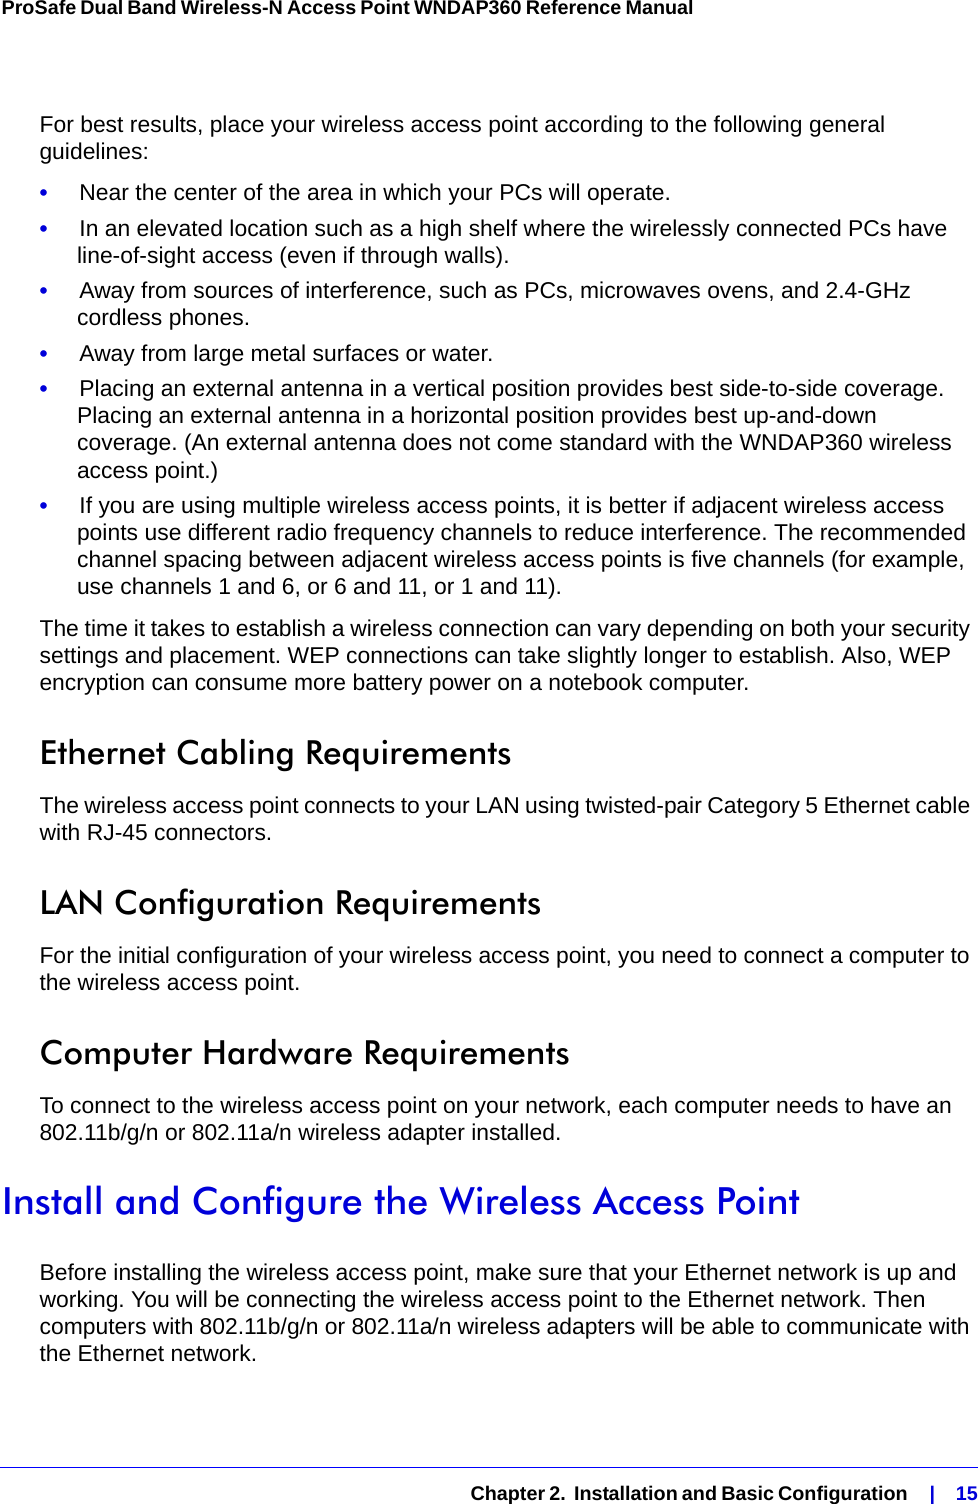   Chapter 2.  Installation and Basic Configuration    |    15ProSafe Dual Band Wireless-N Access Point WNDAP360 Reference Manual For best results, place your wireless access point according to the following general guidelines:•     Near the center of the area in which your PCs will operate.•     In an elevated location such as a high shelf where the wirelessly connected PCs have line-of-sight access (even if through walls).•     Away from sources of interference, such as PCs, microwaves ovens, and 2.4-GHz cordless phones.•     Away from large metal surfaces or water.•     Placing an external antenna in a vertical position provides best side-to-side coverage. Placing an external antenna in a horizontal position provides best up-and-down coverage. (An external antenna does not come standard with the WNDAP360 wireless access point.)•     If you are using multiple wireless access points, it is better if adjacent wireless access points use different radio frequency channels to reduce interference. The recommended channel spacing between adjacent wireless access points is five channels (for example, use channels 1 and 6, or 6 and 11, or 1 and 11).The time it takes to establish a wireless connection can vary depending on both your security settings and placement. WEP connections can take slightly longer to establish. Also, WEP encryption can consume more battery power on a notebook computer.Ethernet Cabling RequirementsThe wireless access point connects to your LAN using twisted-pair Category 5 Ethernet cable with RJ-45 connectors.LAN Configuration RequirementsFor the initial configuration of your wireless access point, you need to connect a computer to the wireless access point.Computer Hardware RequirementsTo connect to the wireless access point on your network, each computer needs to have an 802.11b/g/n or 802.11a/n wireless adapter installed.Install and Configure the Wireless Access PointBefore installing the wireless access point, make sure that your Ethernet network is up and working. You will be connecting the wireless access point to the Ethernet network. Then computers with 802.11b/g/n or 802.11a/n wireless adapters will be able to communicate with the Ethernet network.